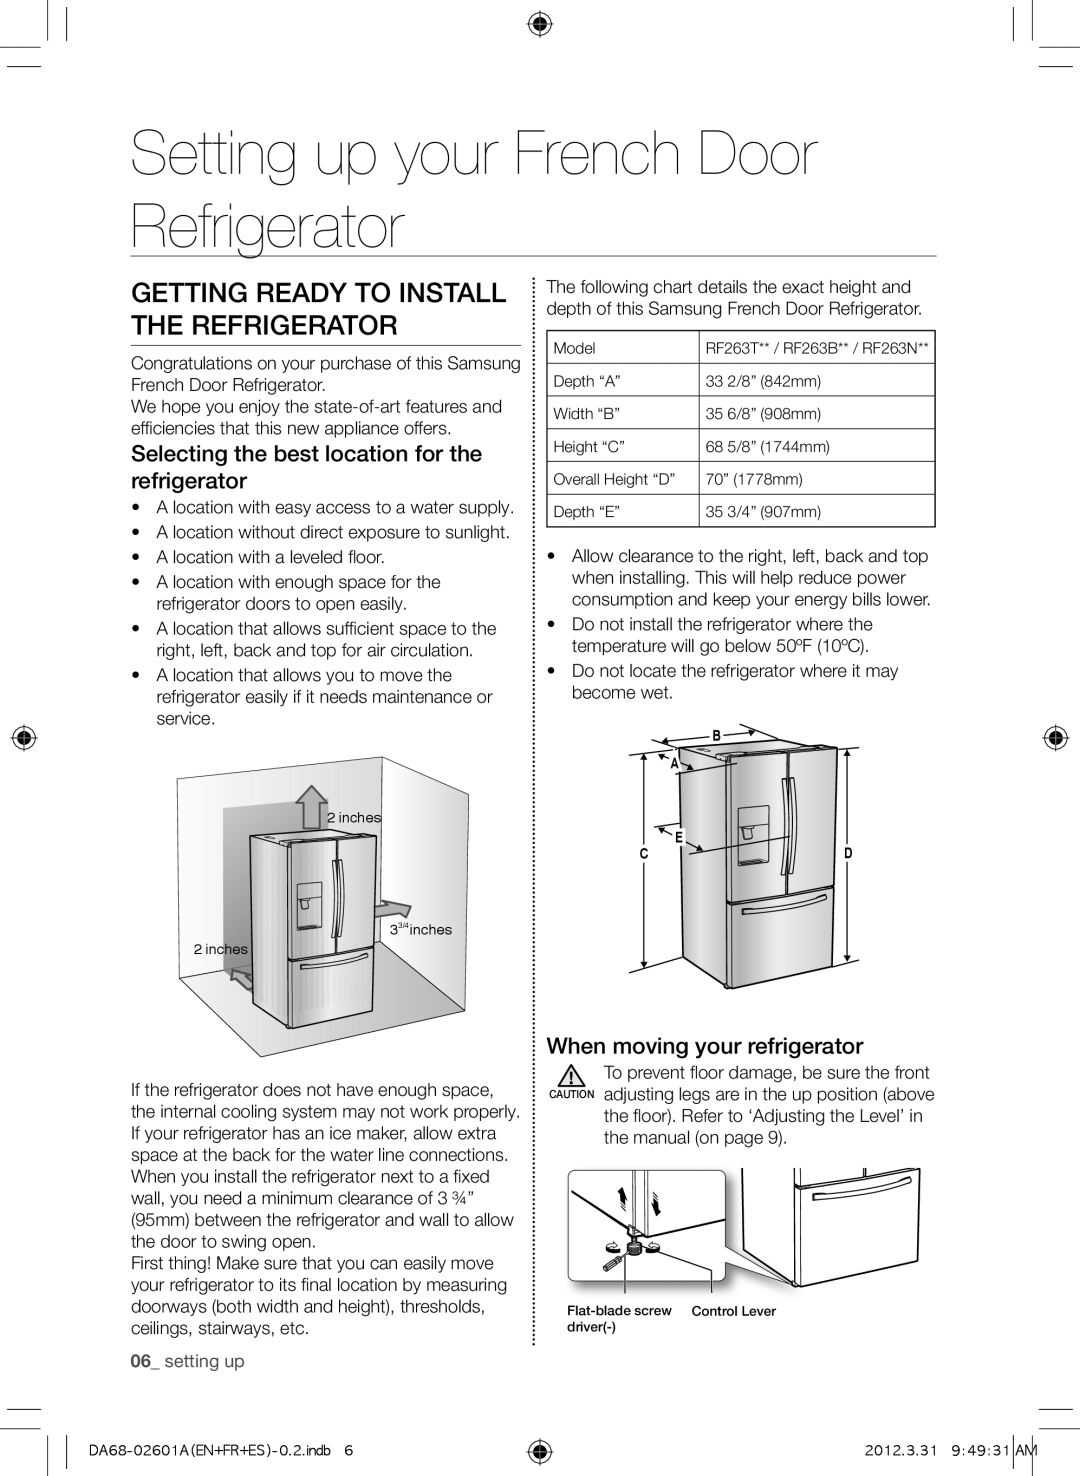 Samsung RF263TE, RF263BE Setting up your French Door Refrigerator, Getting ready to install the refrigerator, setting up 